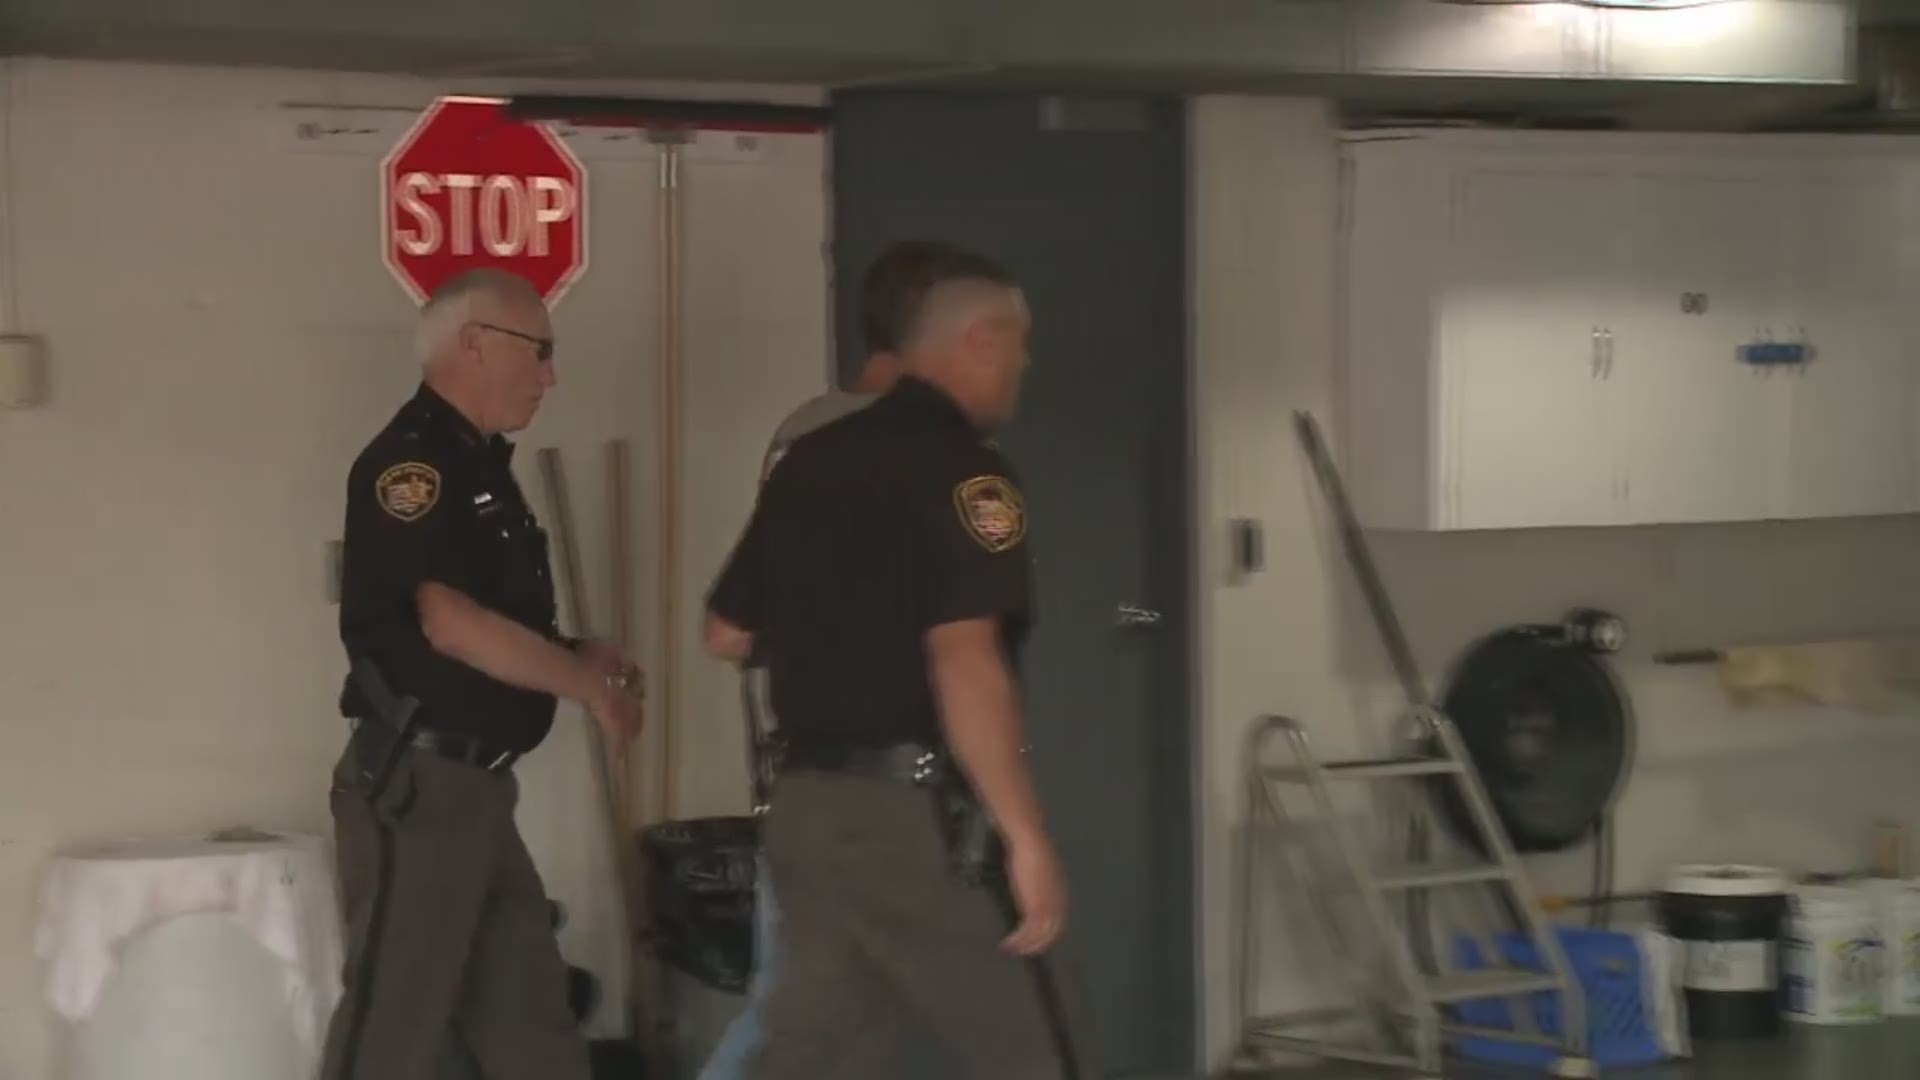 Matthew Little, seen being escorted into the Carroll County jail in this video, has been arrested and indicted on 15 charges in the death of Carroll County teen Jonathan Minard.